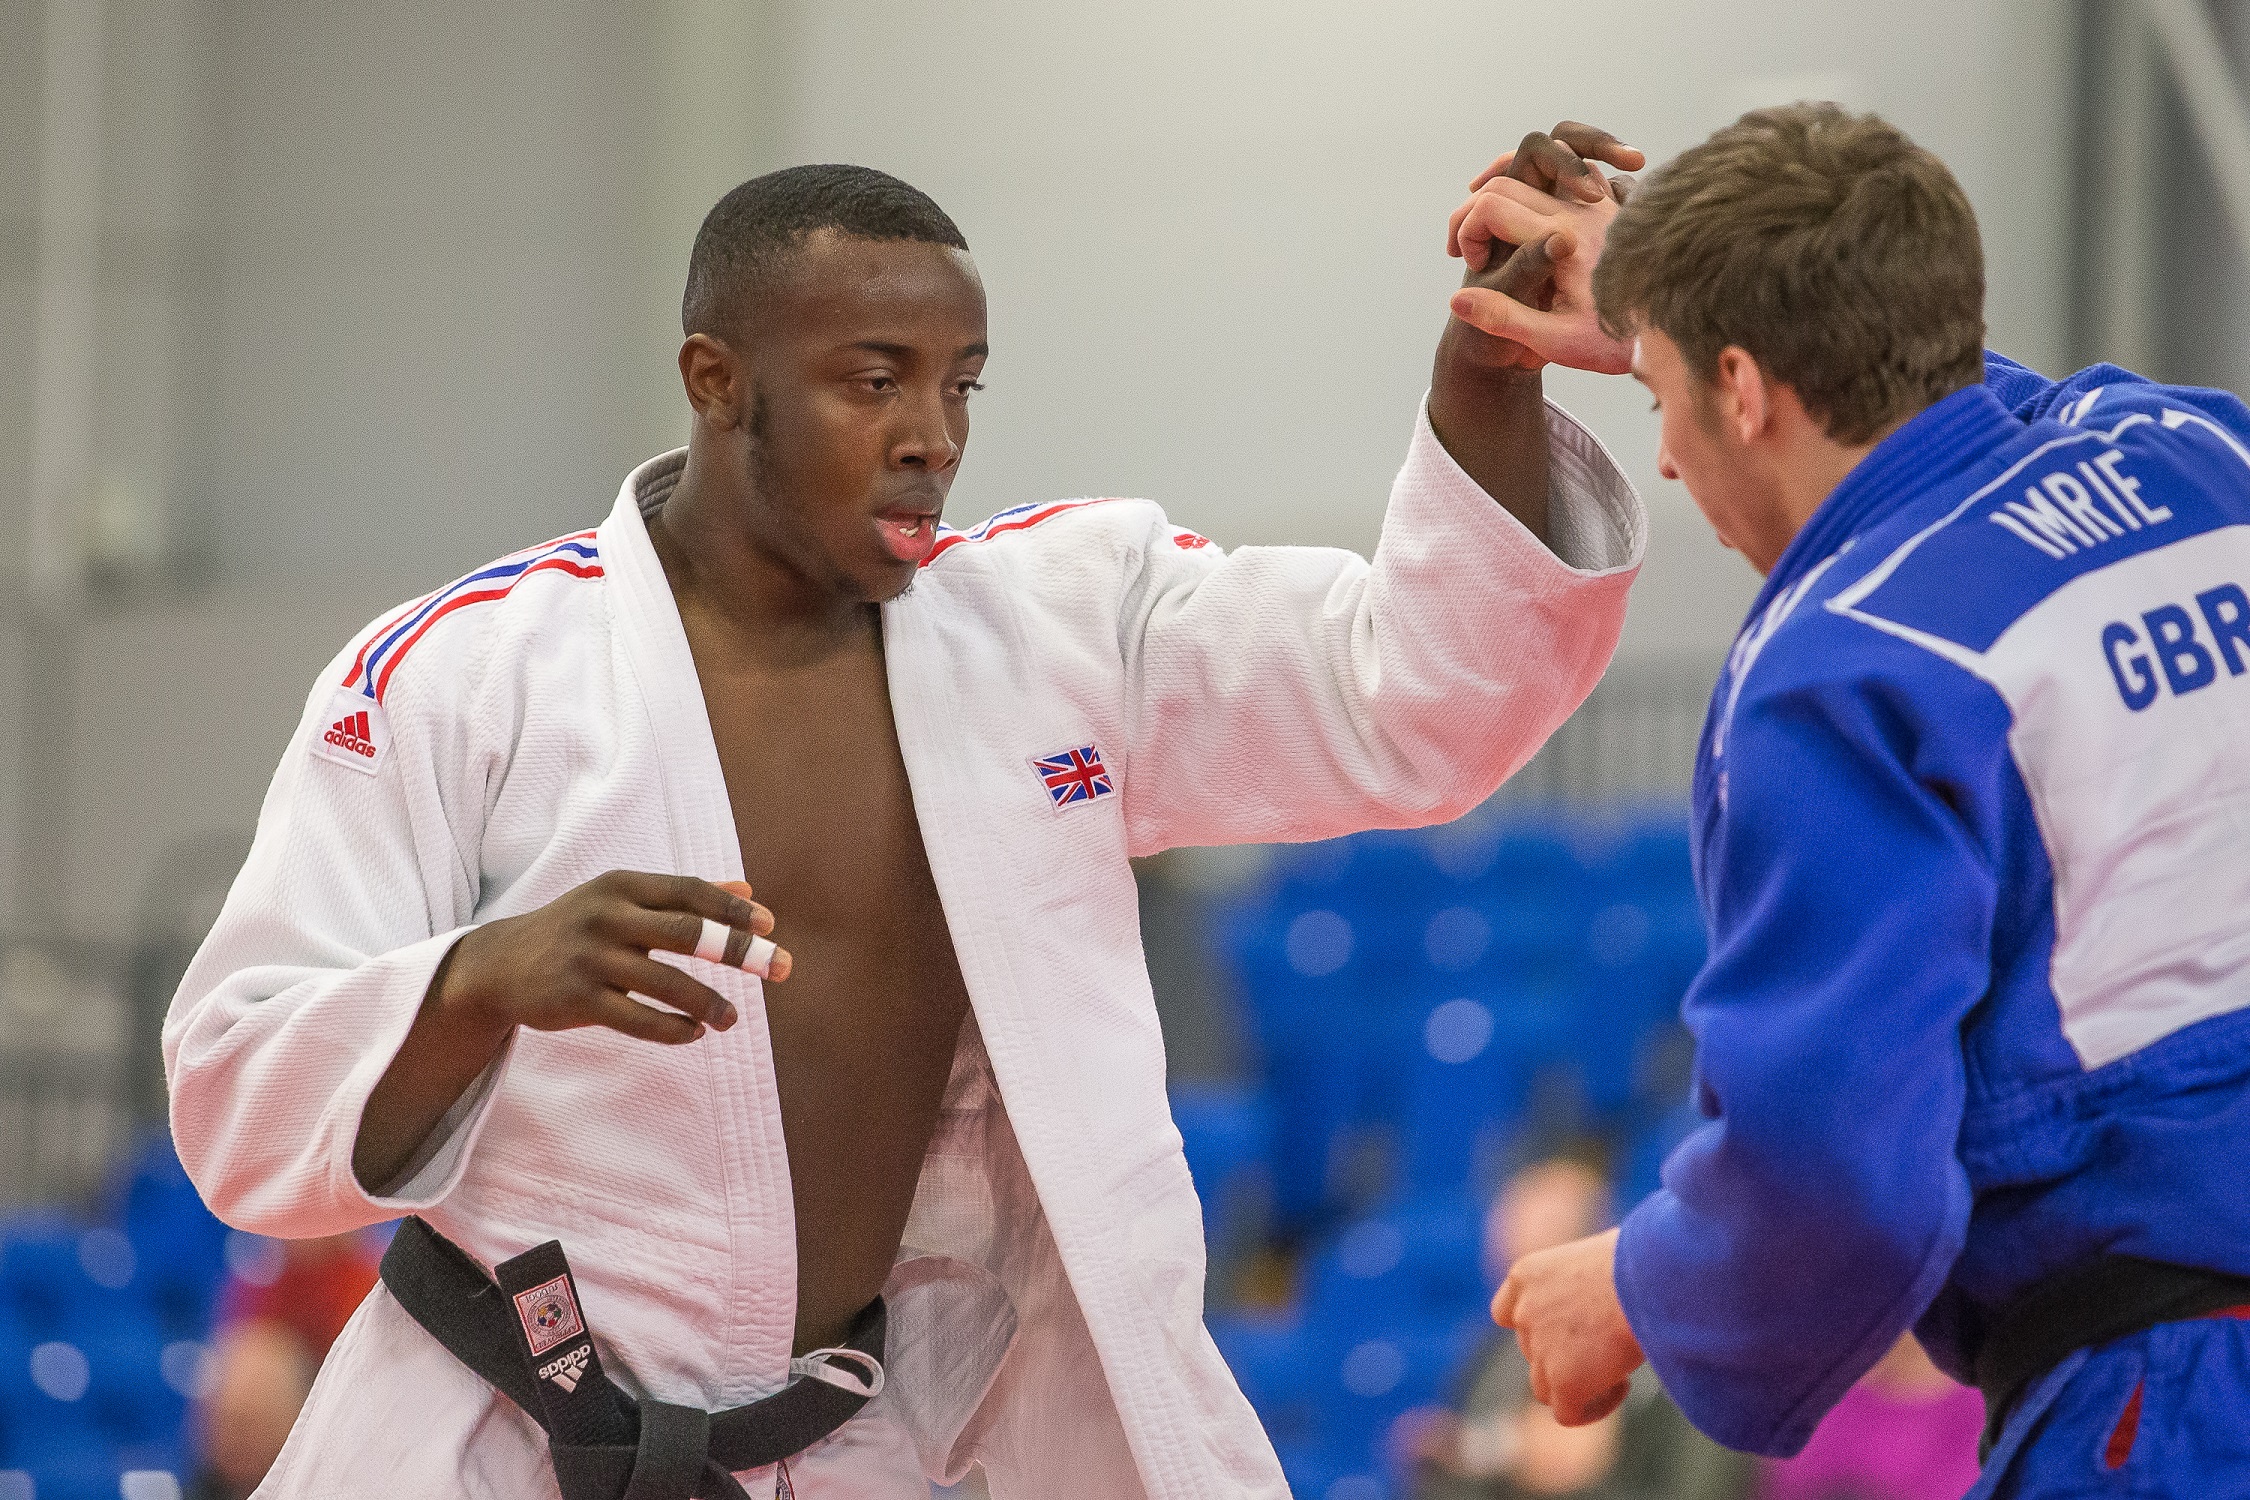 Jamal Petgrave competing in judo at the B U C S Championships 